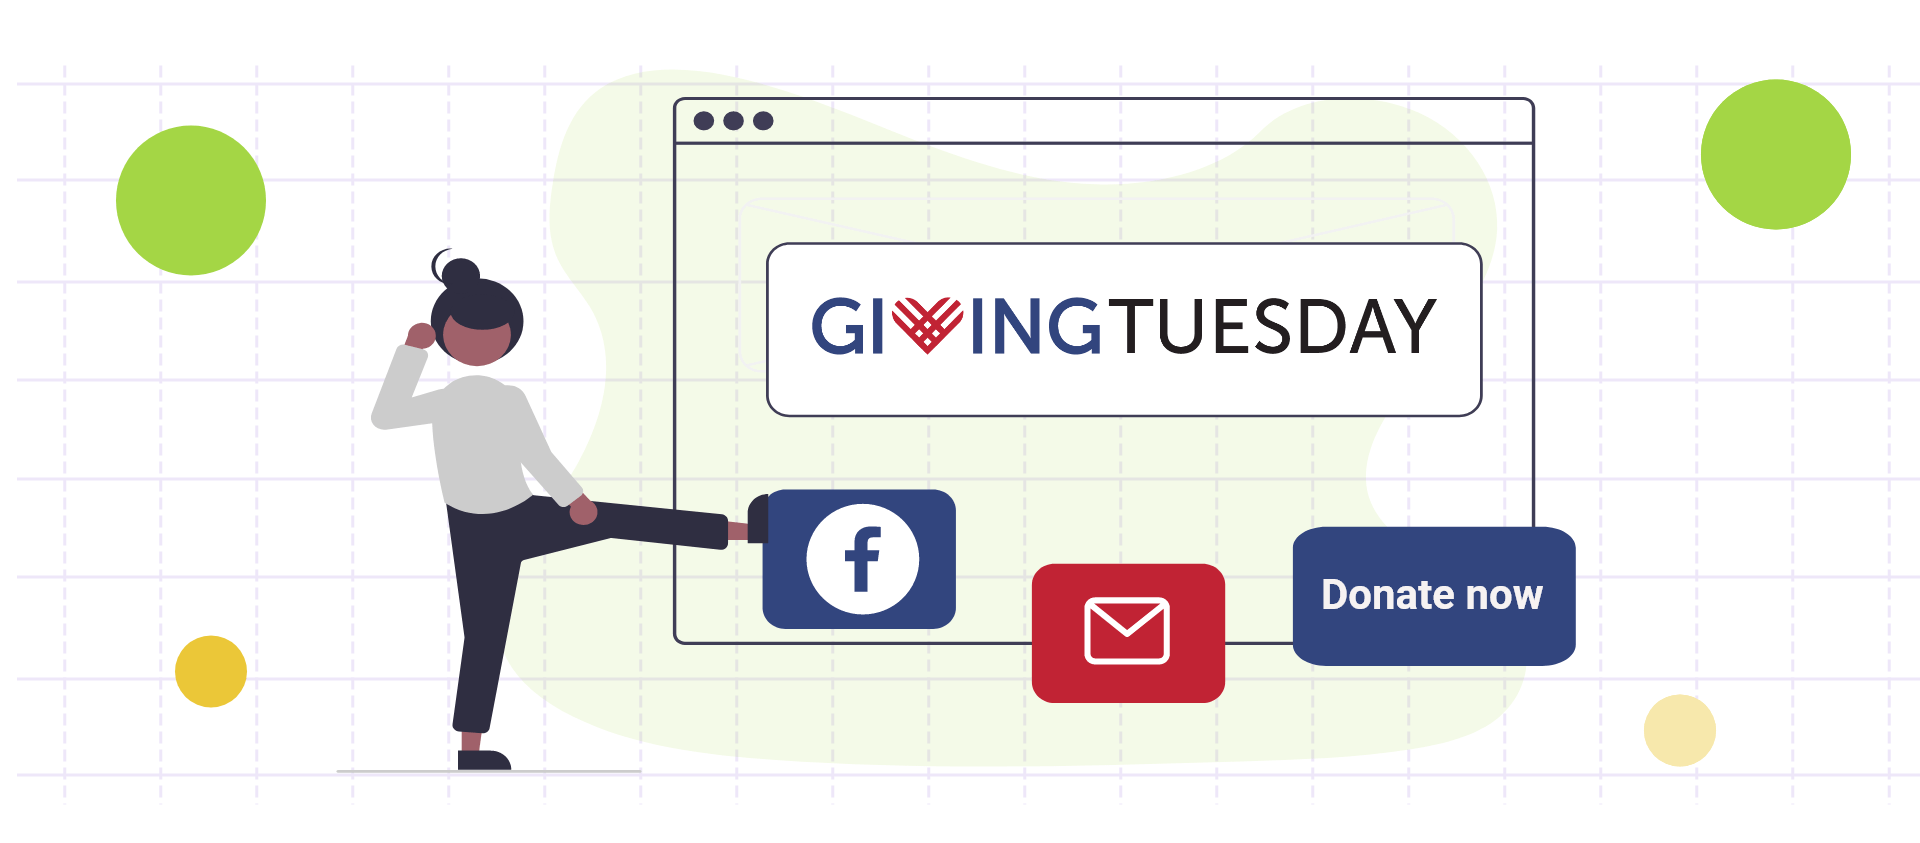 20 Steps to Running a Successful Giving Tuesday 2021 Campaign